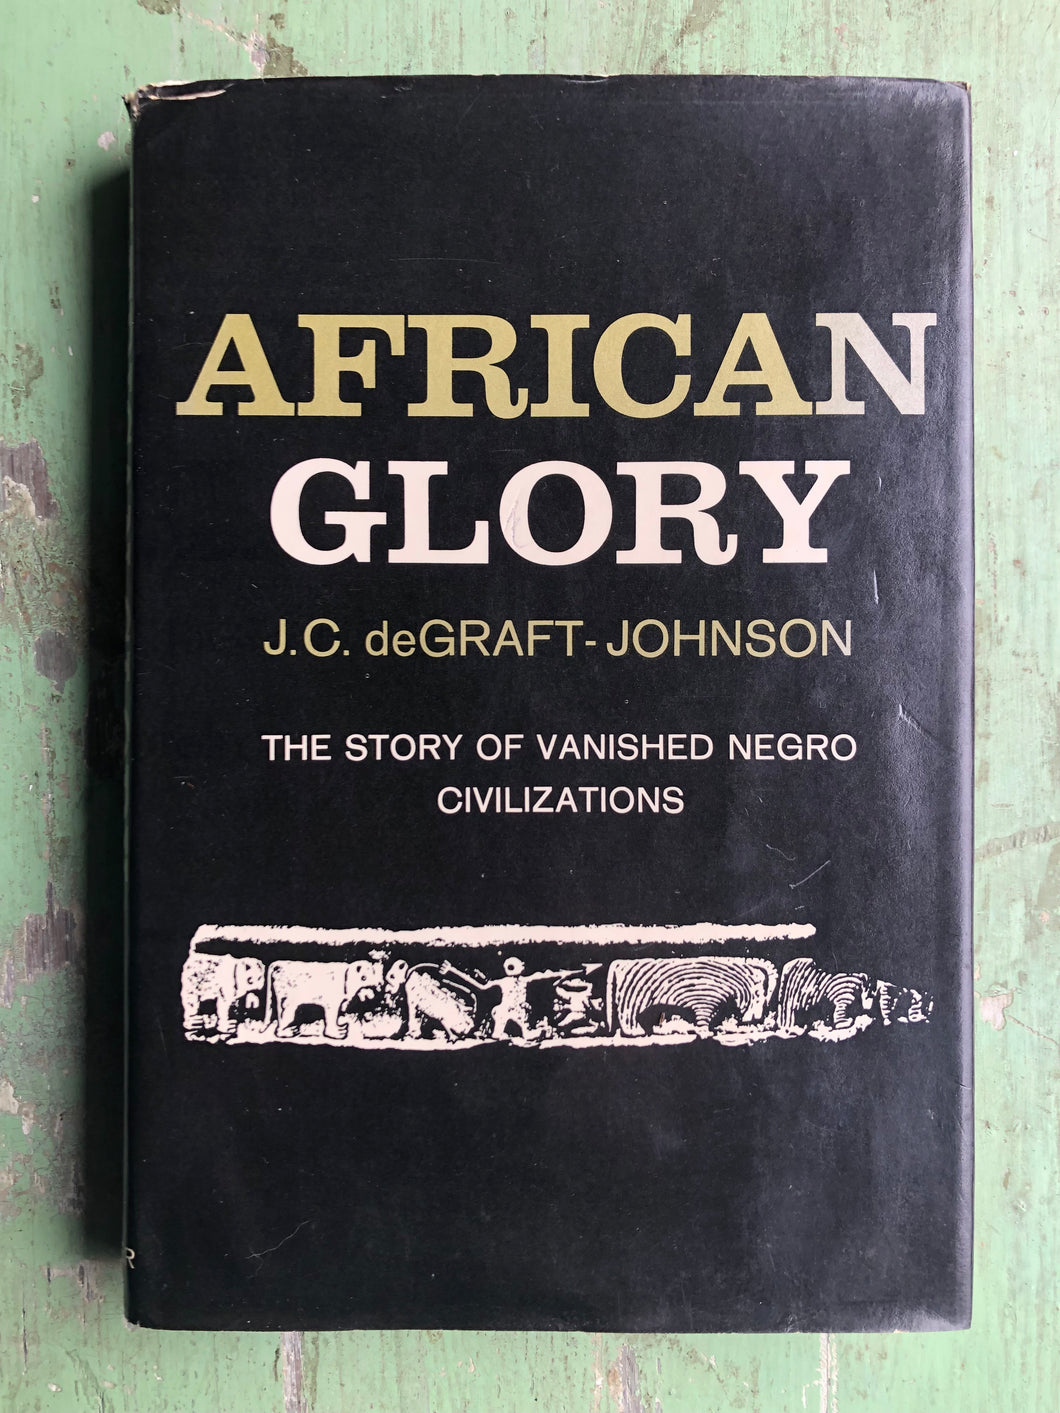 African Glory: The Story of Vanished Negro Civilizations. by J. C. deGraft-Johnson